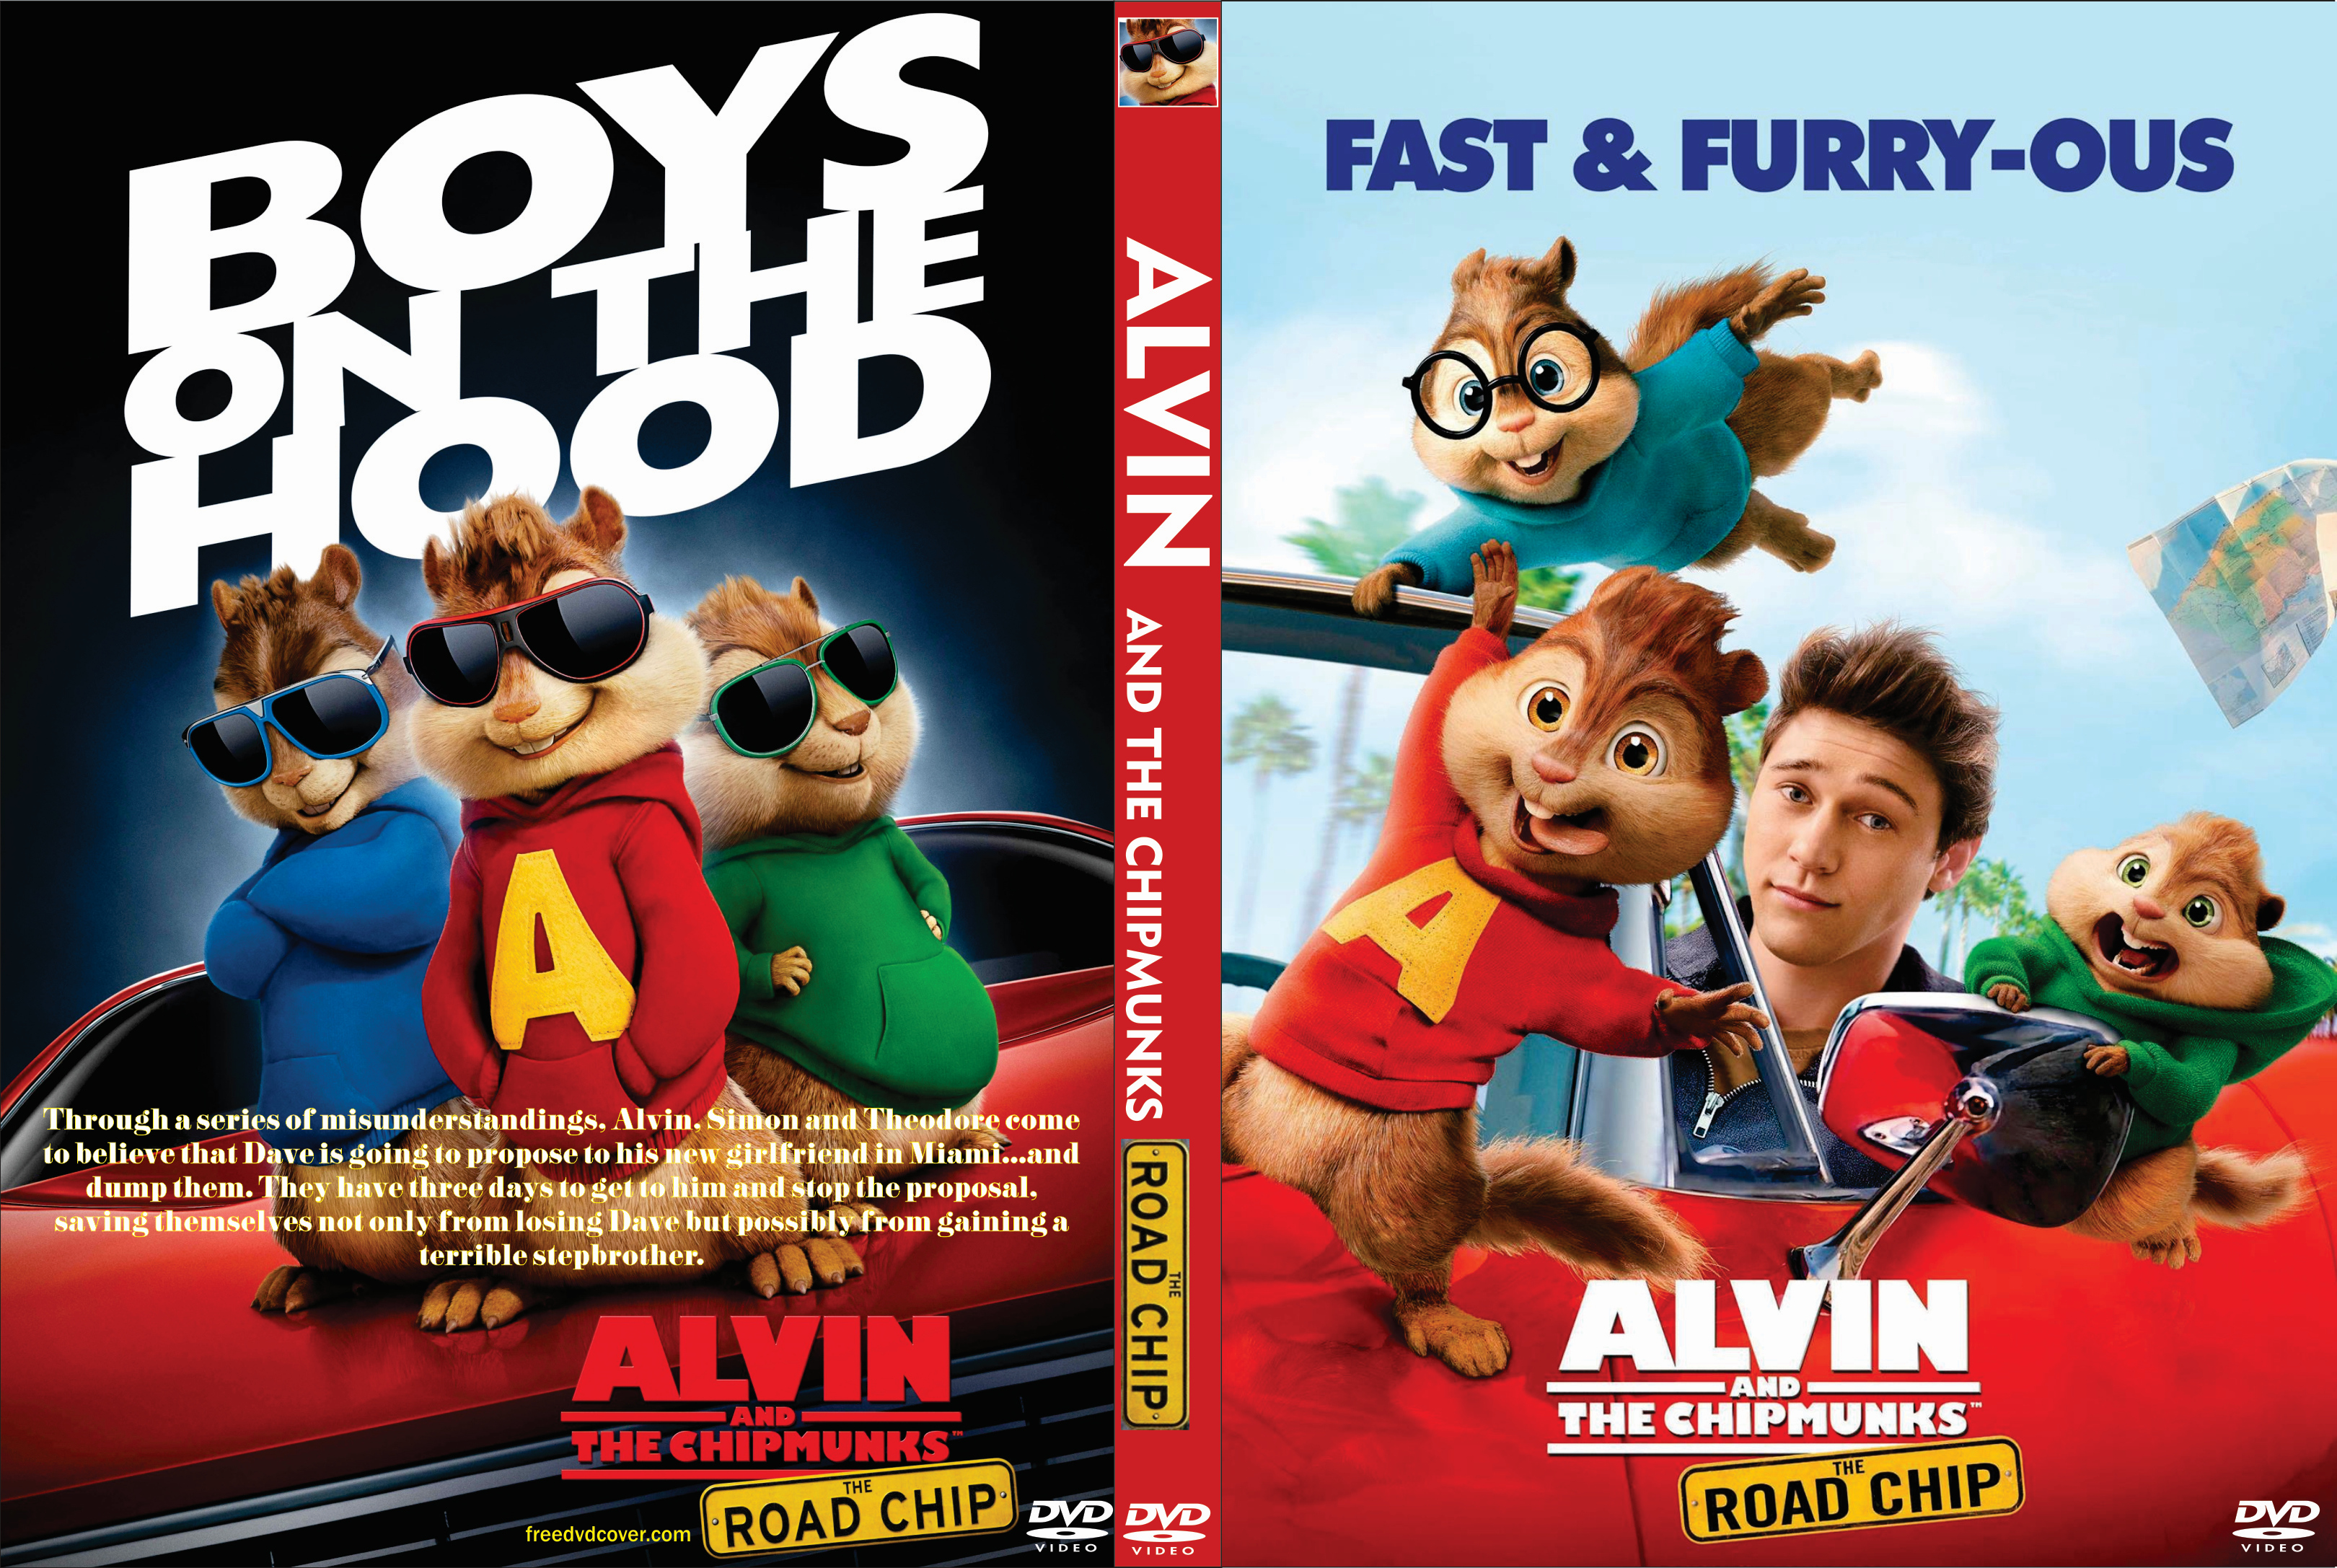 alvin and the chipmunks the road chip 2015 custom front.